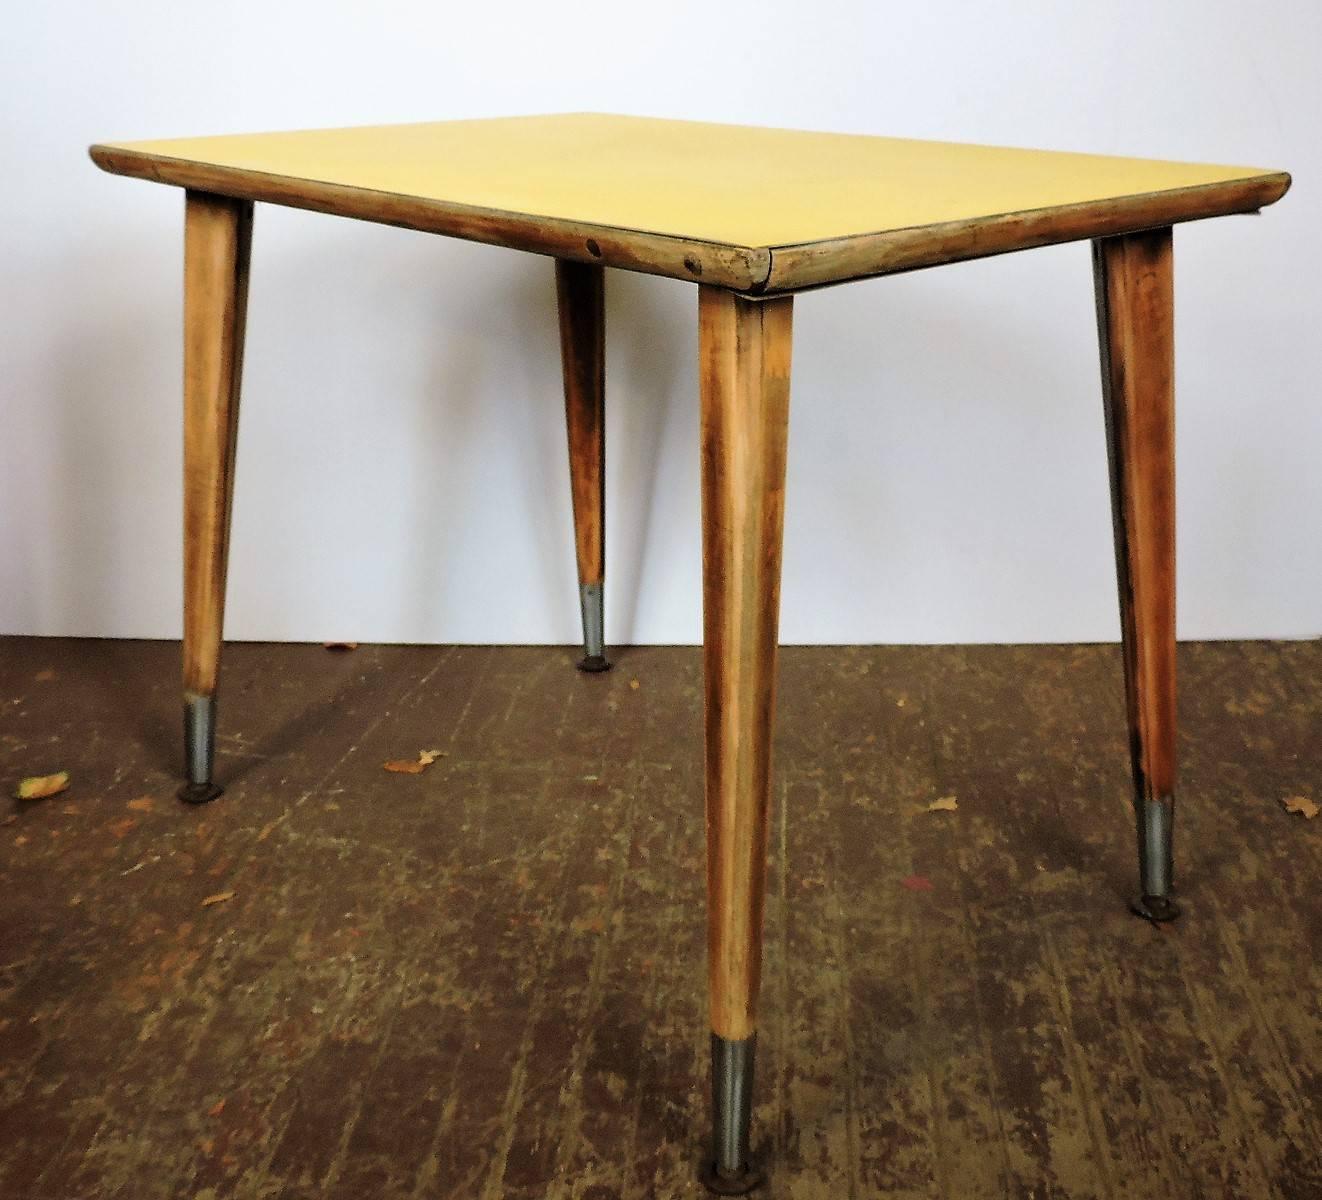 In the style of Jean Prouve - a Mid-Century Industrial table with beautifully angled splayed legs ending in long aluminum foot sleeves with swiveling foot caps. The top in original aged yellow laminate surrounded by pegged convex molding. Beautiful